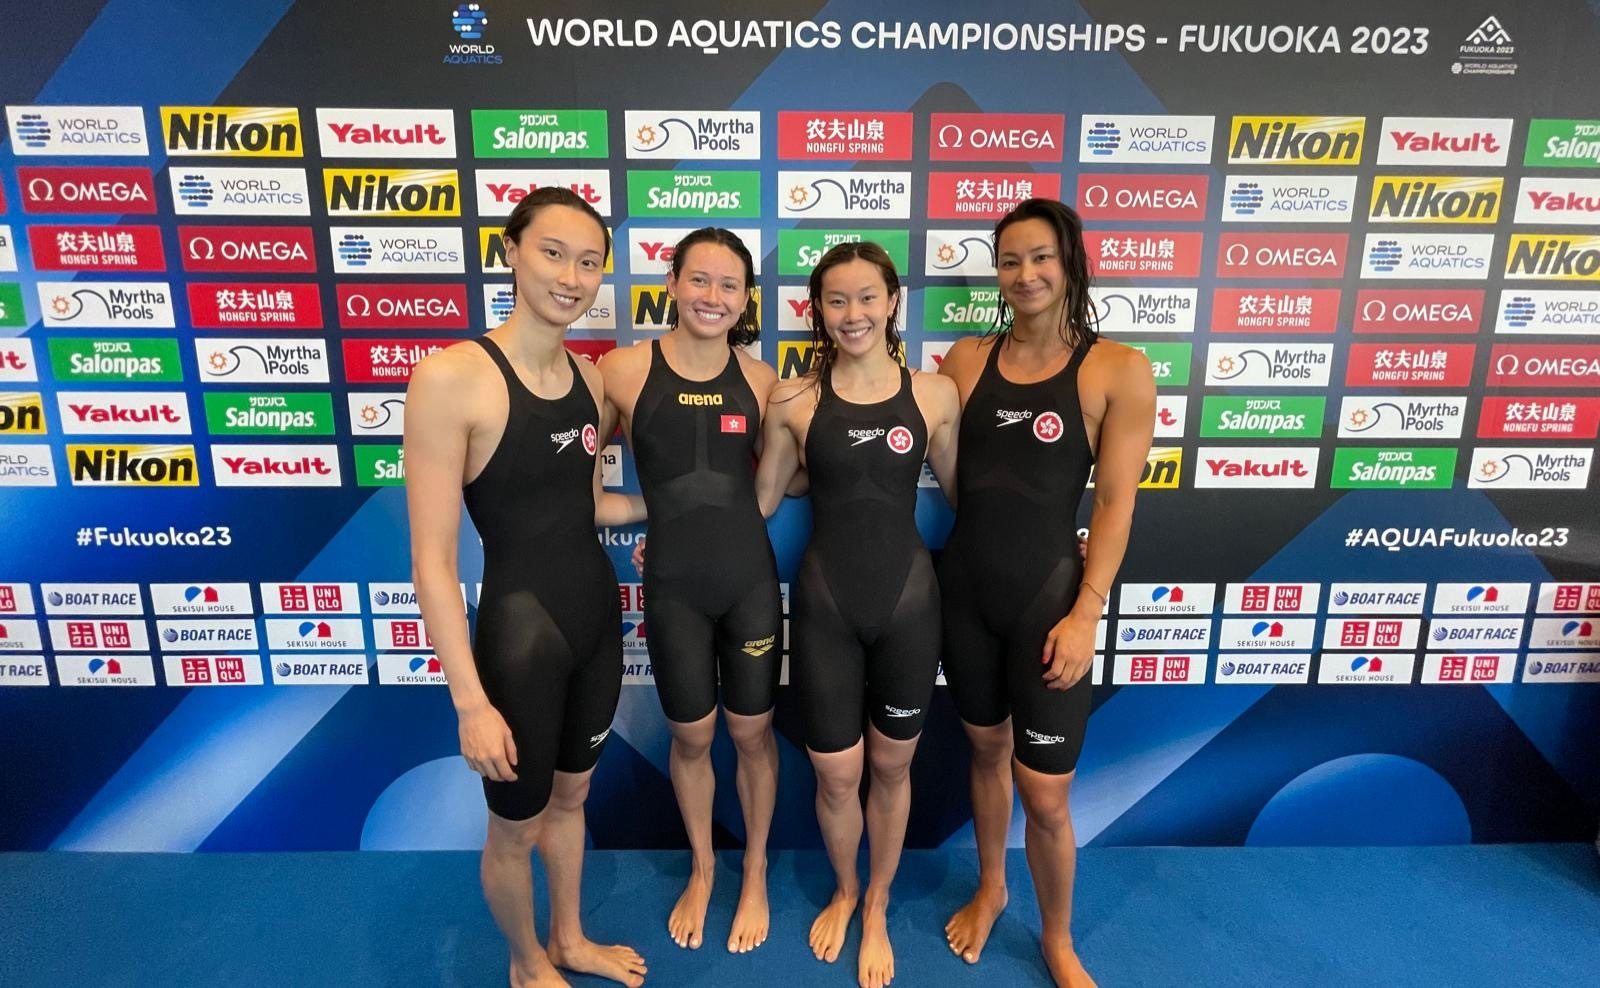 Tam Hoi-lam, Siobhan Haughey, Stephanie Au and Camille Cheng after breaking the city record at the 2023 World Aquatics Championships. Photo: Hong Kong Swimming Association